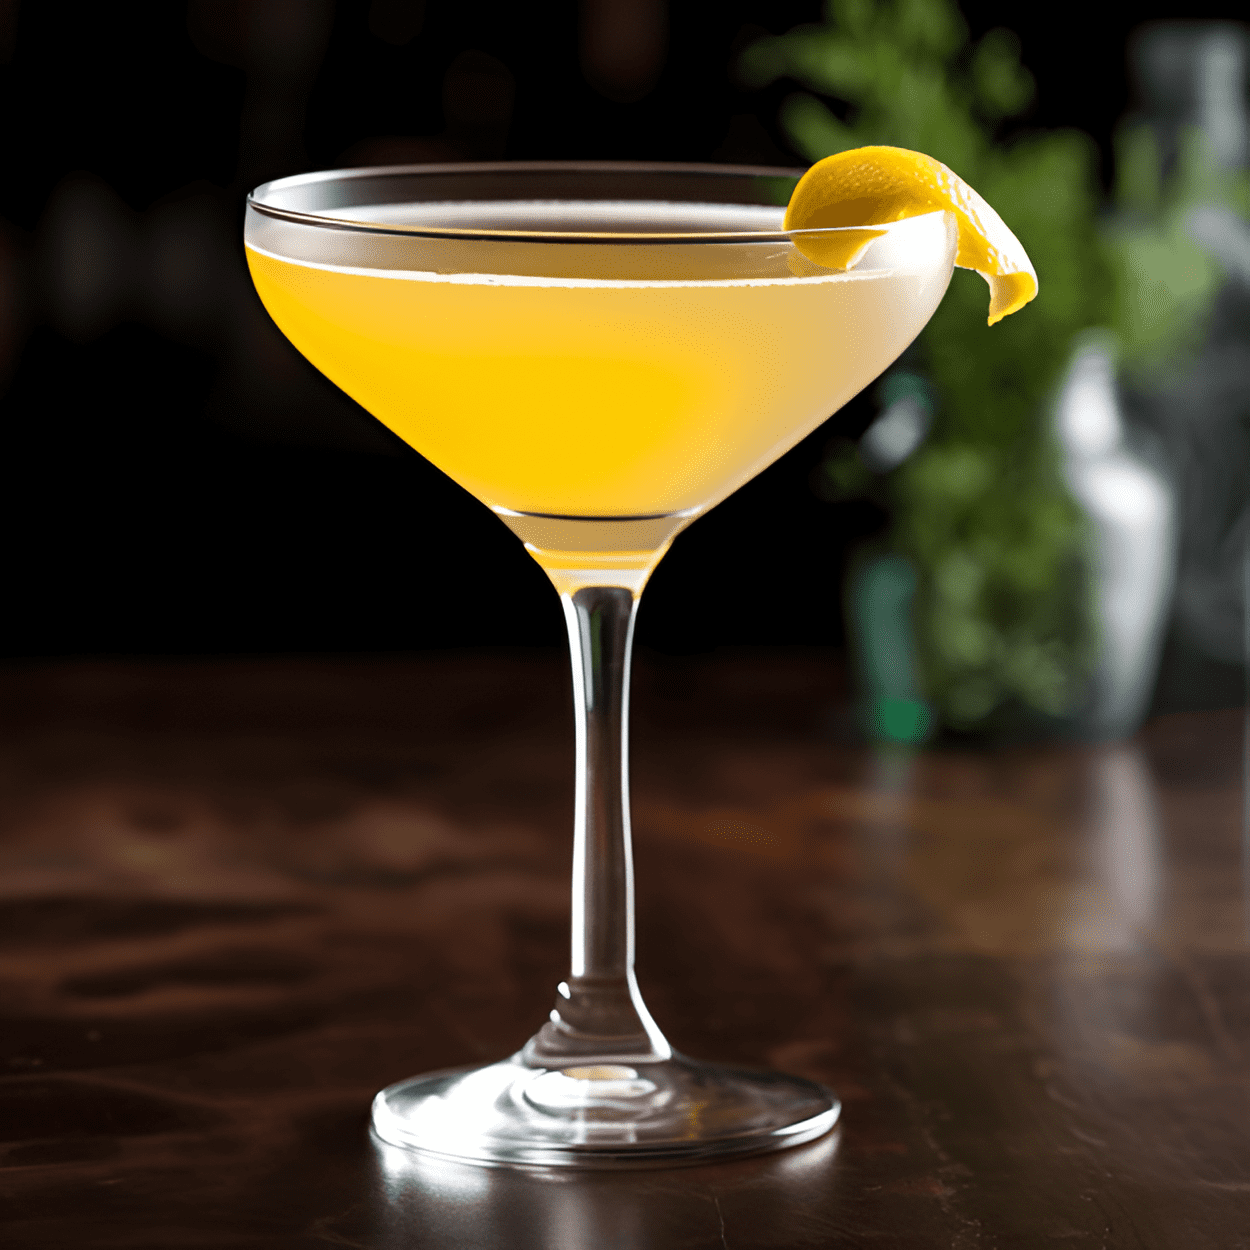 Femme Fatale Cocktail Recipe - The Femme Fatale is a delightful blend of sweet, sour, and strong. The sweetness of the Cointreau is balanced by the sourness of the lemon juice, while the gin adds a potent kick. The cocktail is smooth, refreshing, and has a lingering citrusy aftertaste.